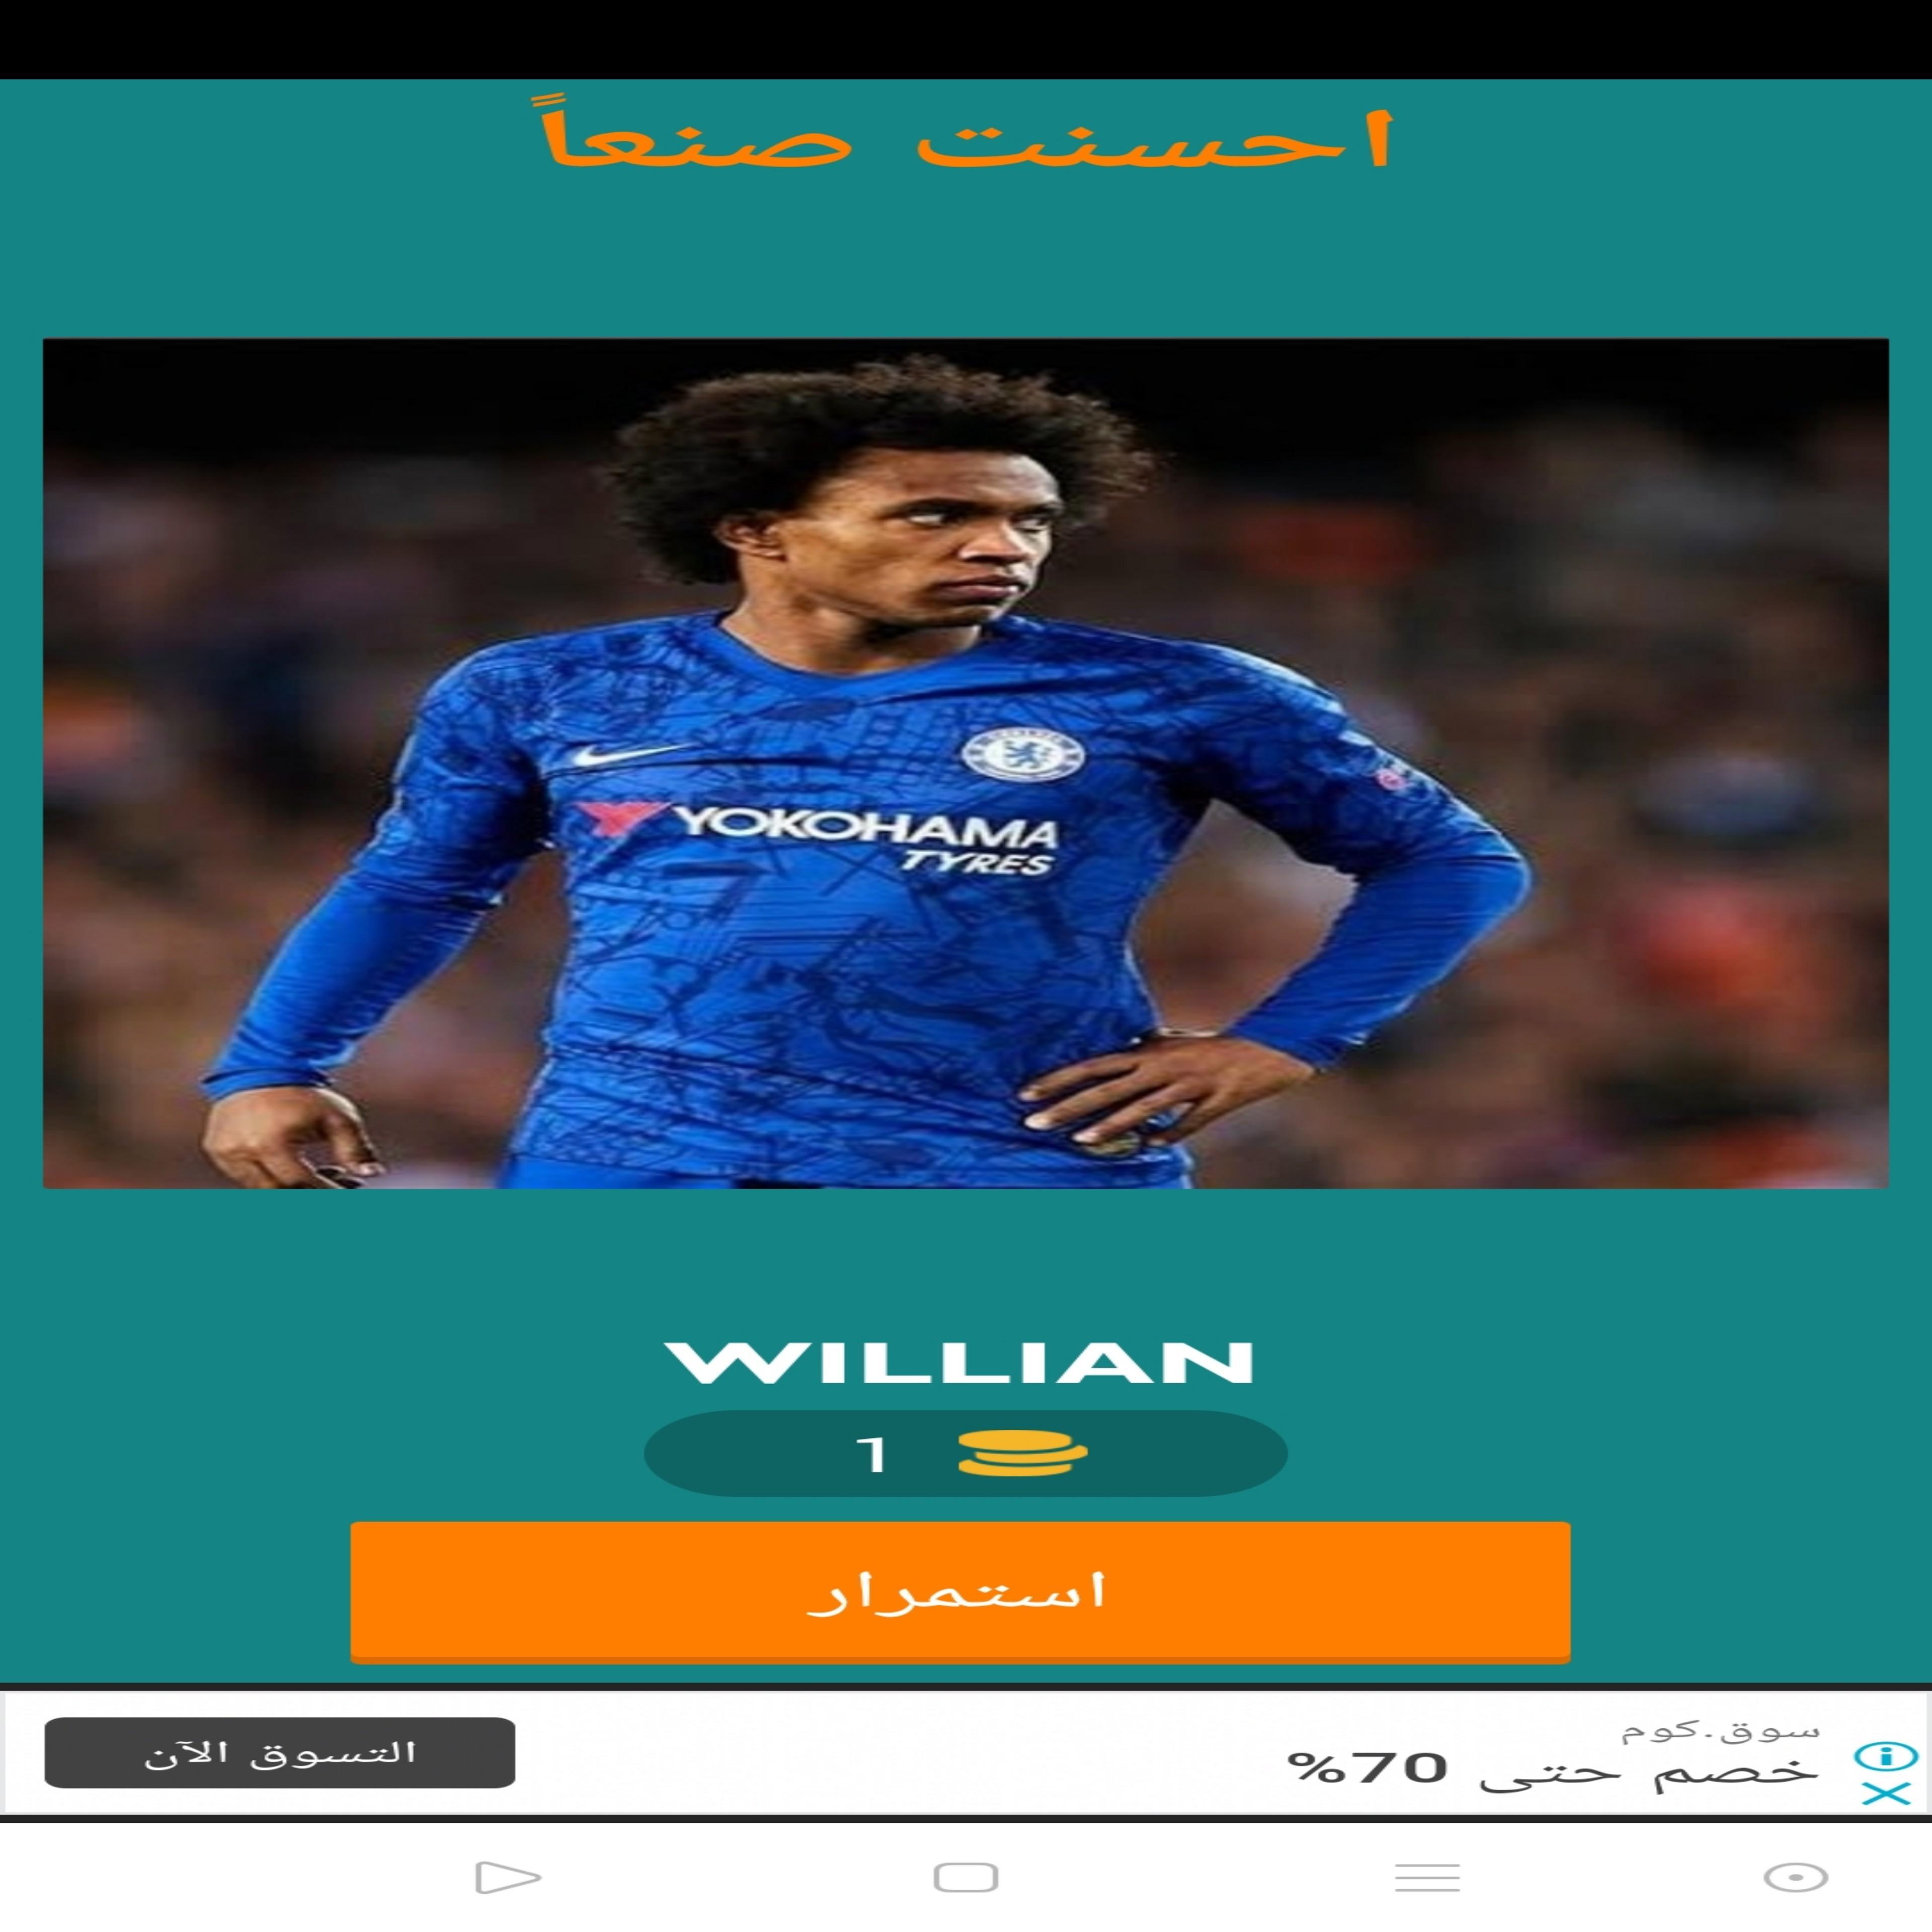 Guess the football player premier league for Android - APK Download